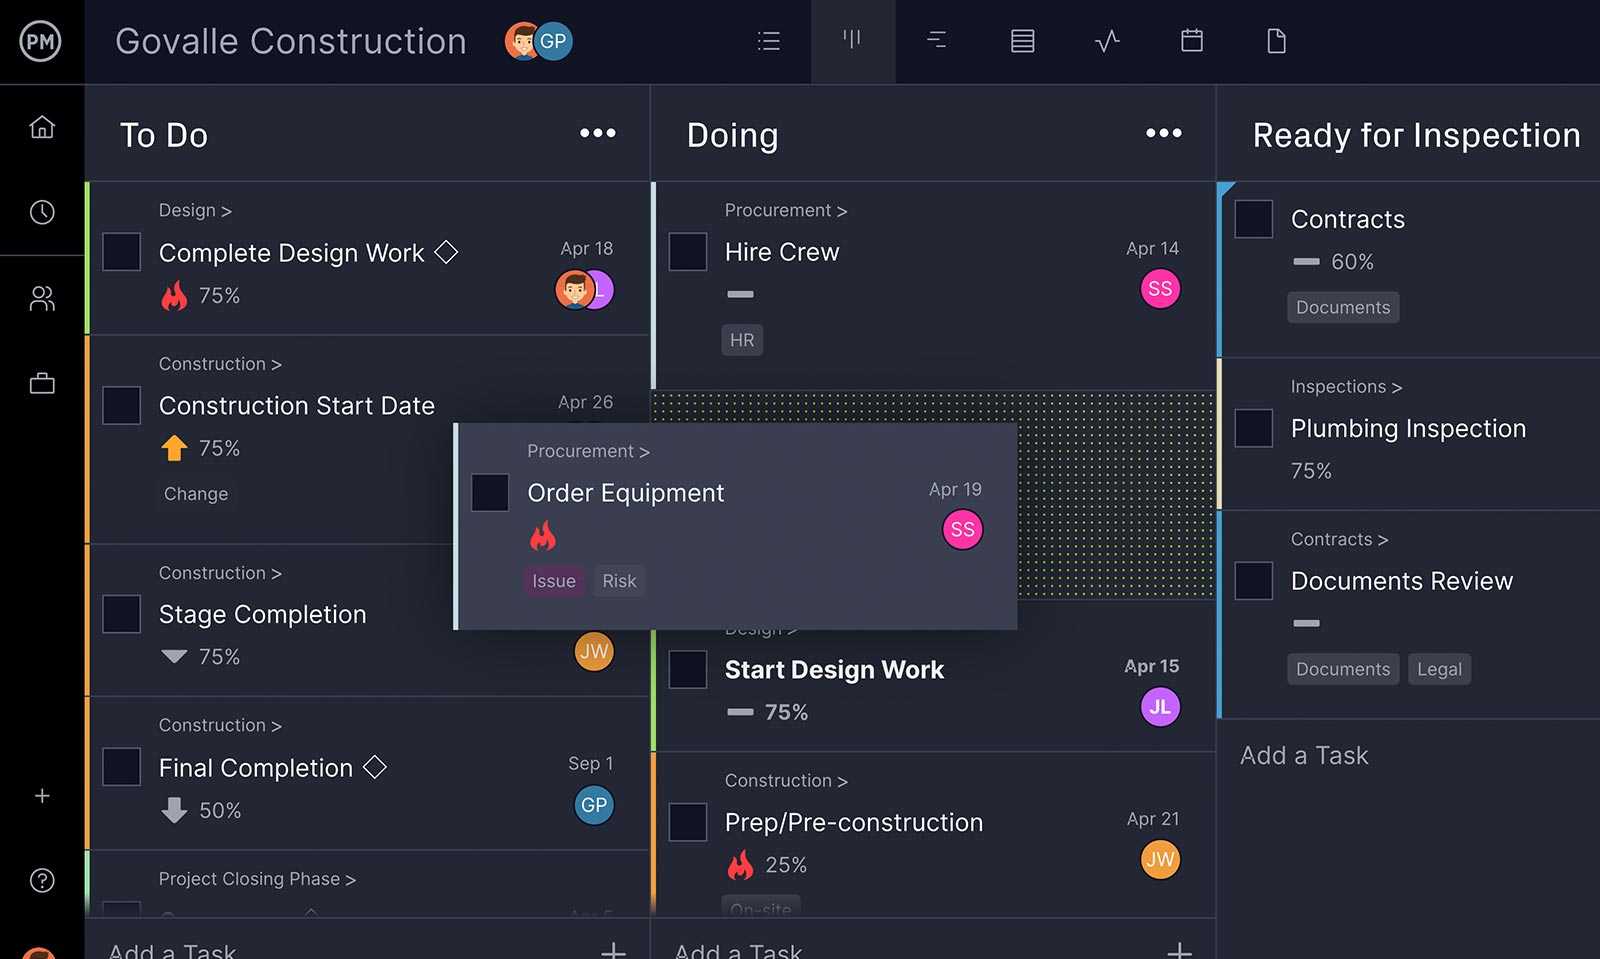 ProjectManager's kanban board is ideal for product management teams